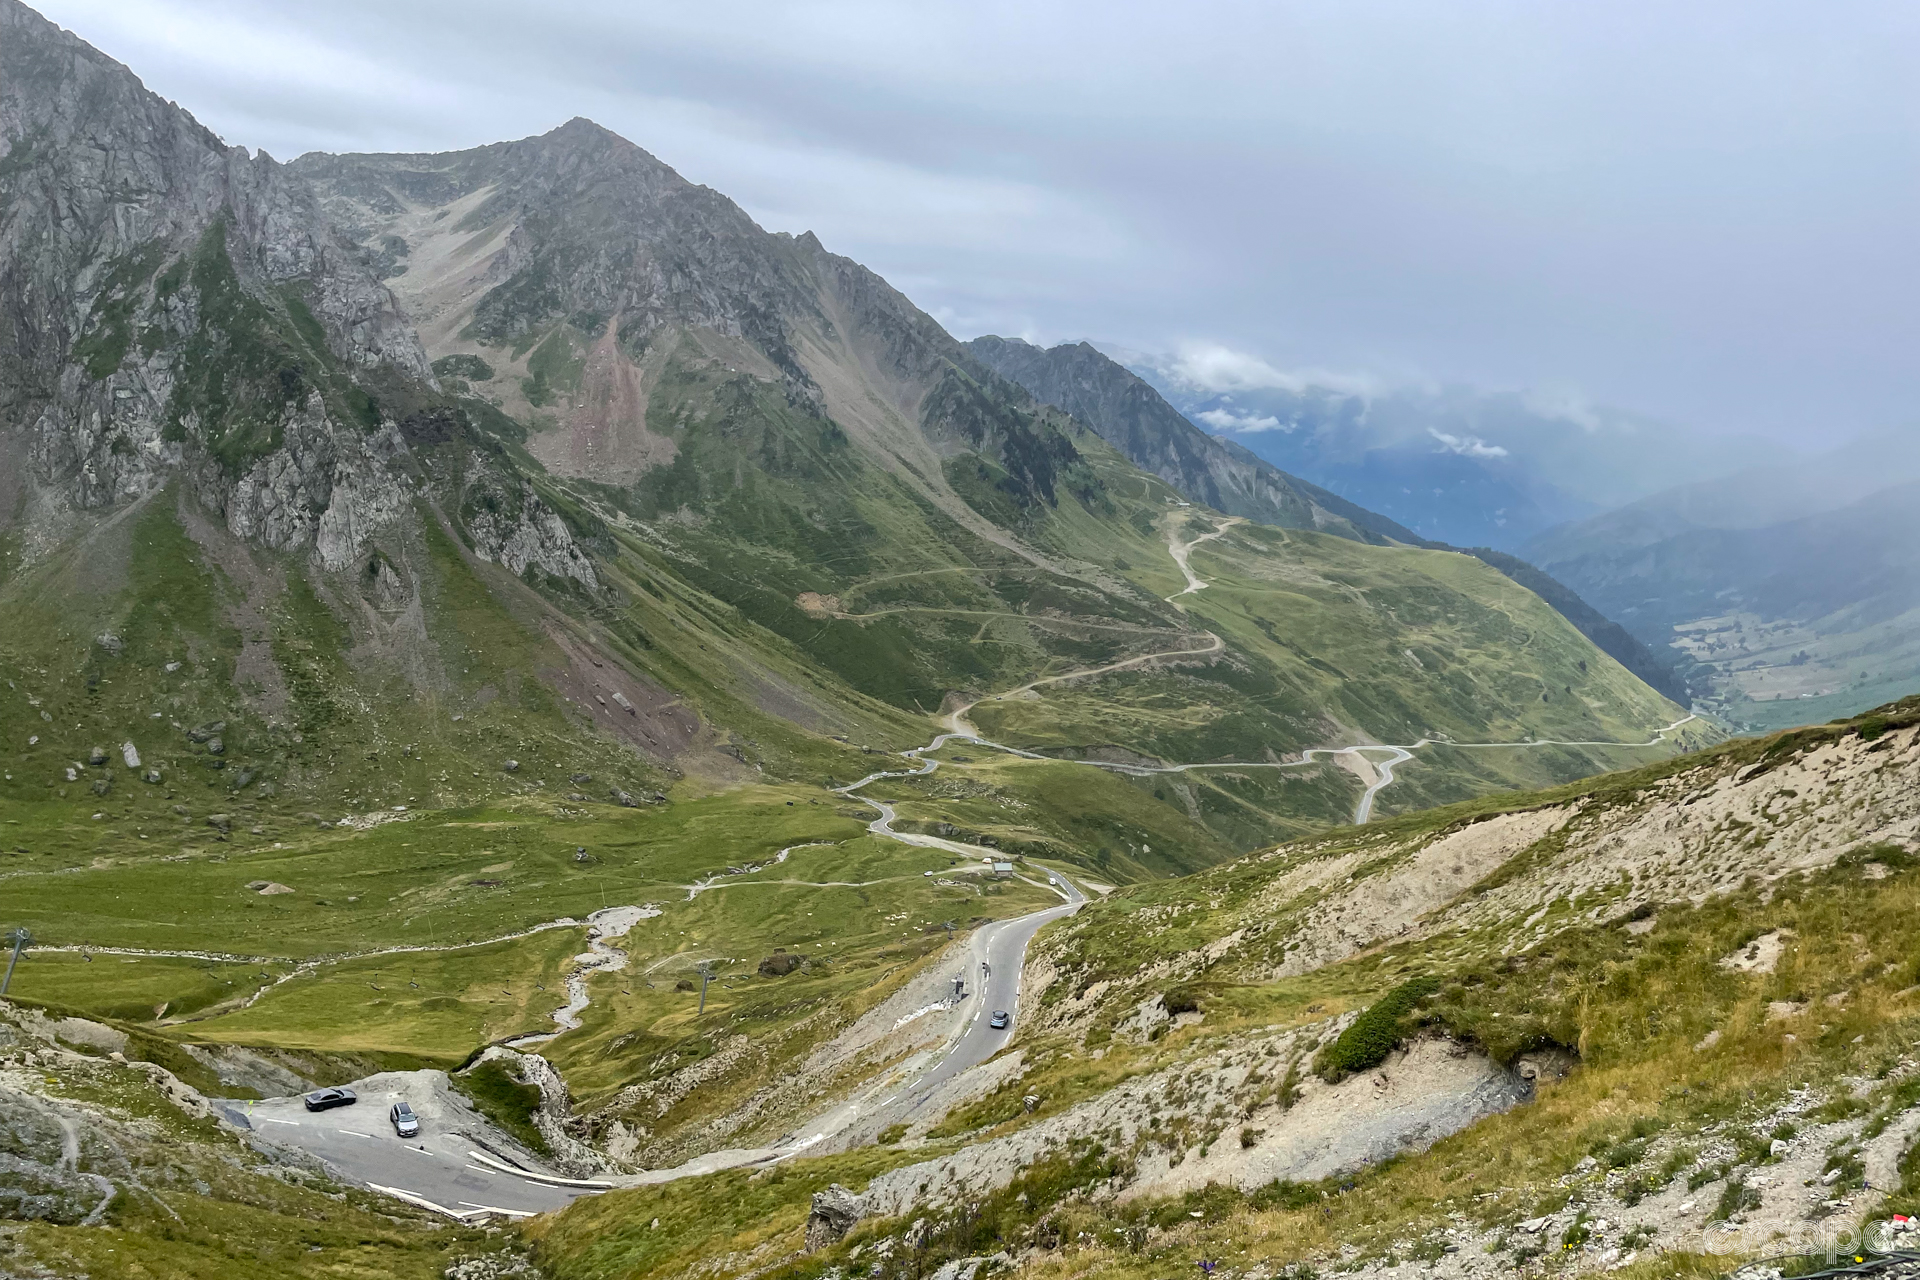 The view down valley from the summit of the Col du Tourmalet: a ribbon of pavement winds down the hillside, with spurs branching off at odd intervals. On either side large peaks rise up, and the summits are covered in clouds.